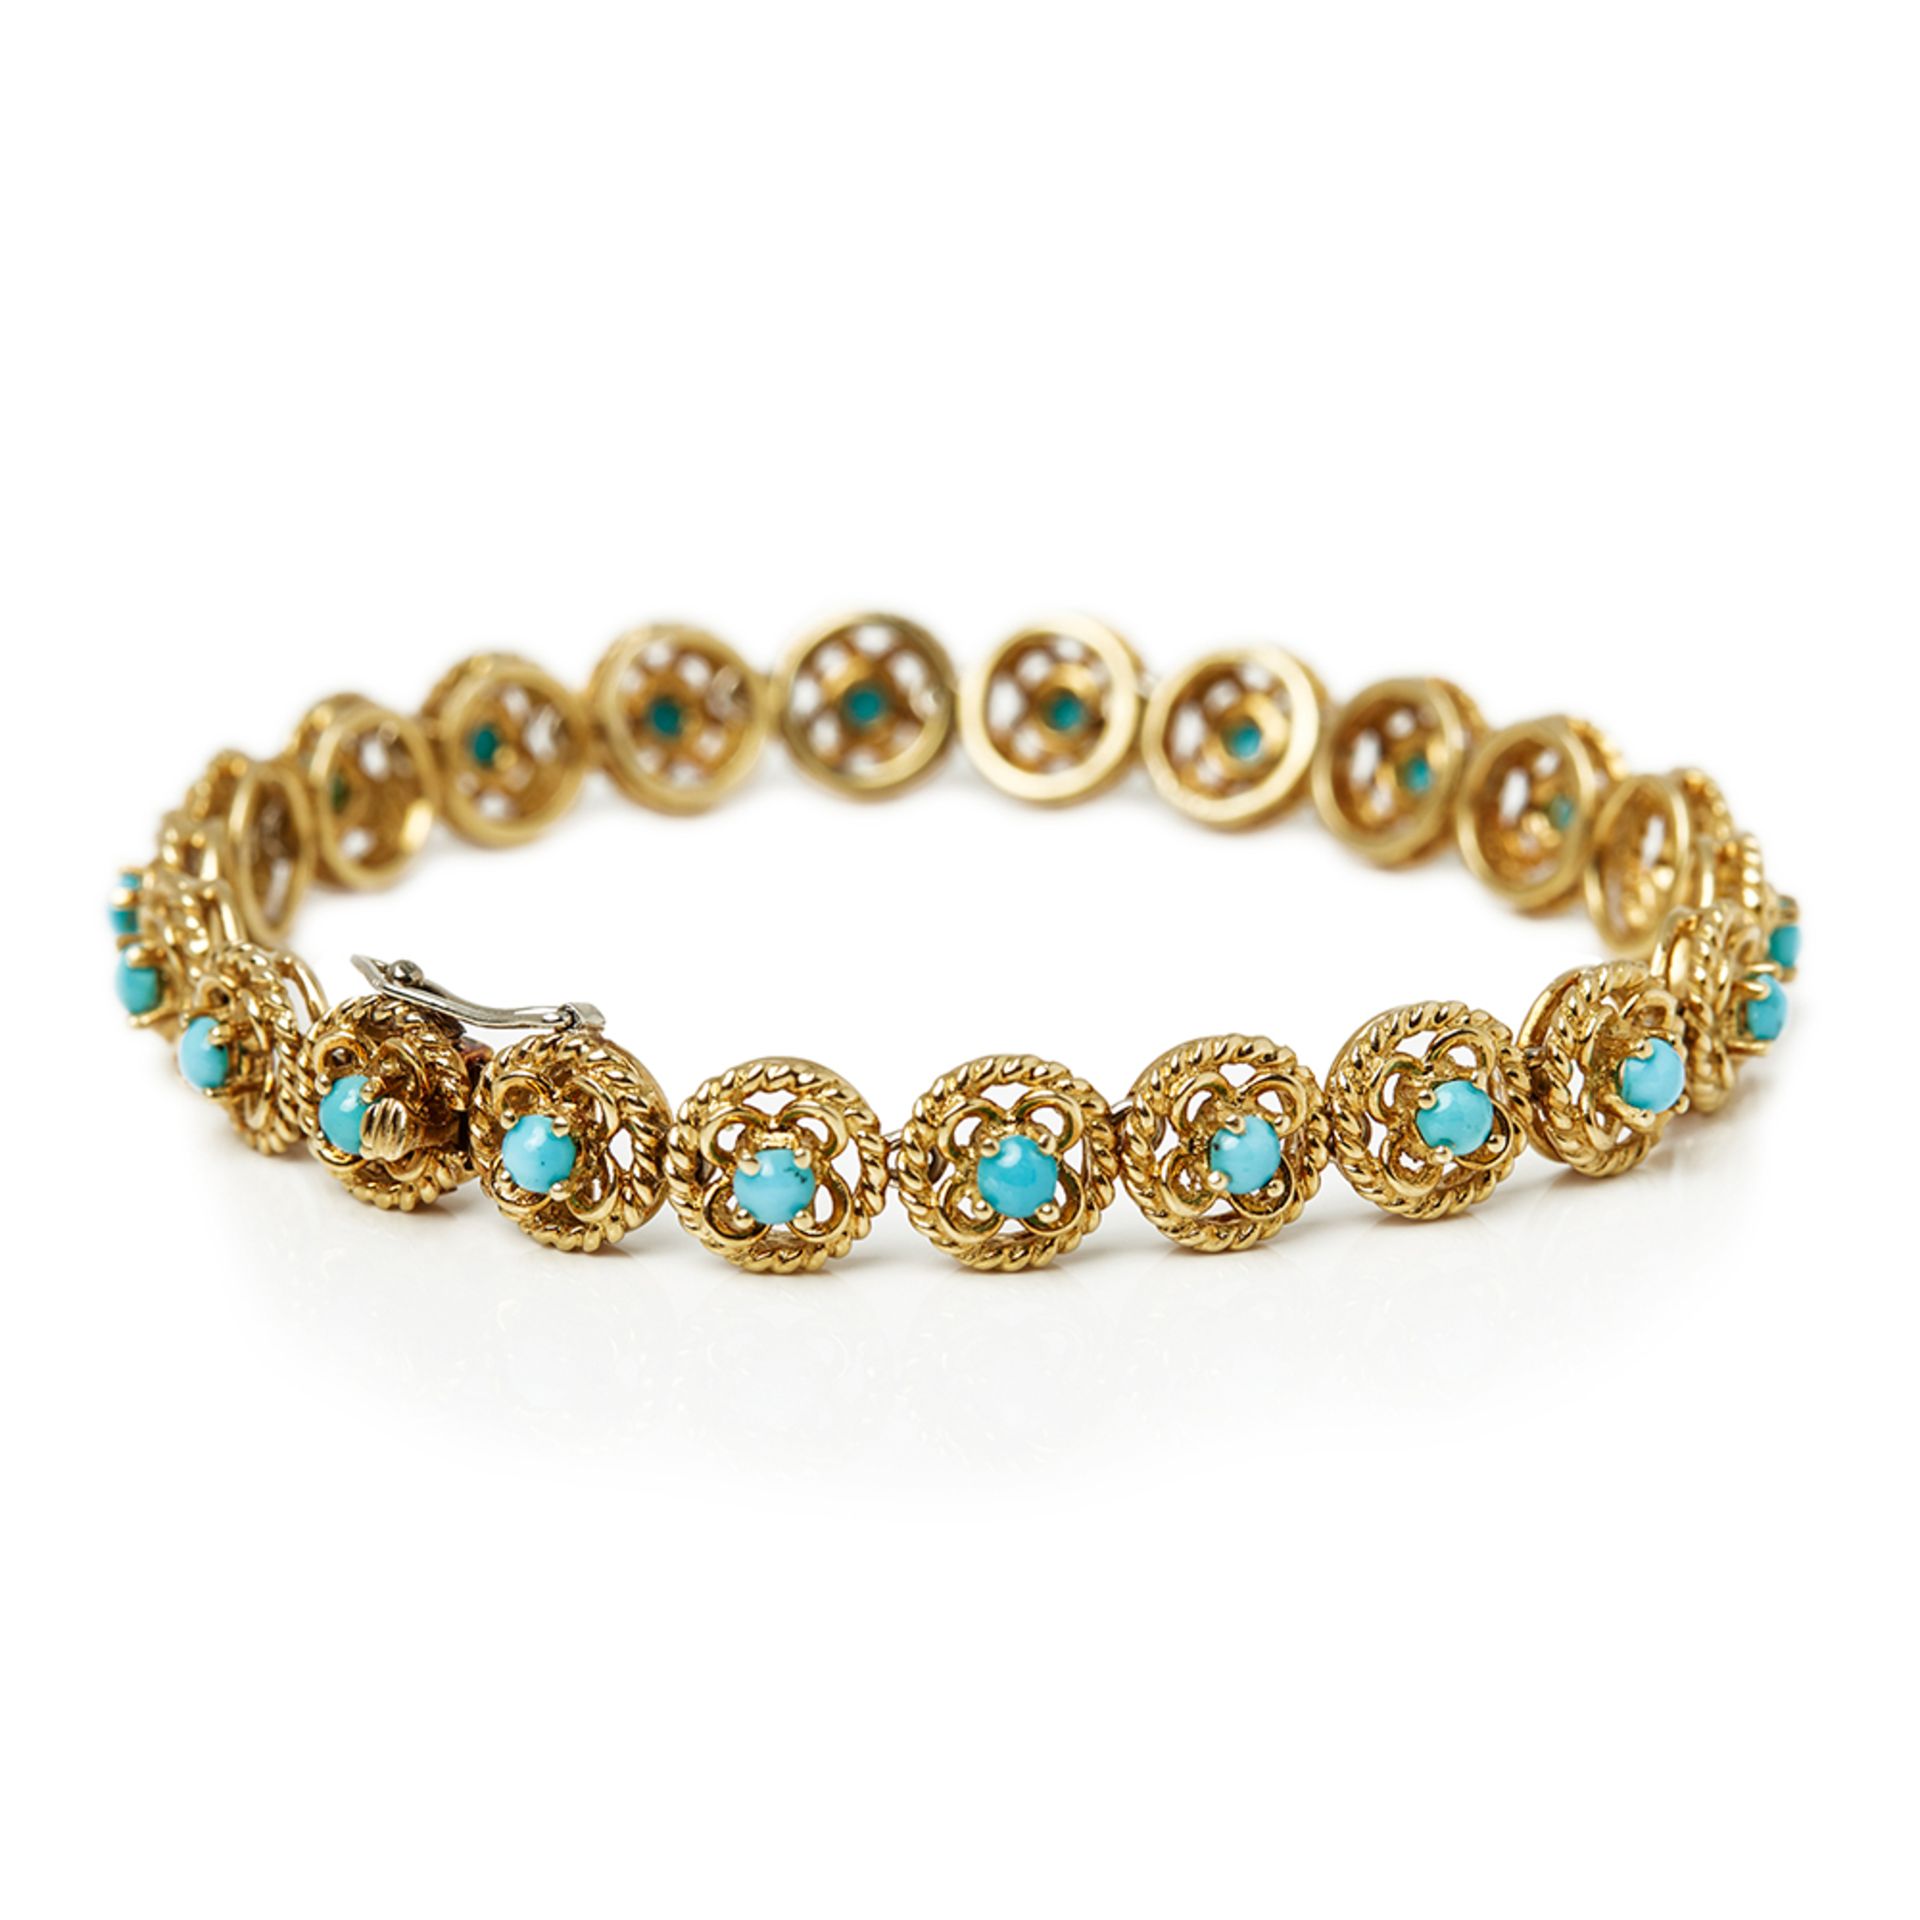 Cartier 18k Yellow Gold Turquoise Bracelet - Image 2 of 12